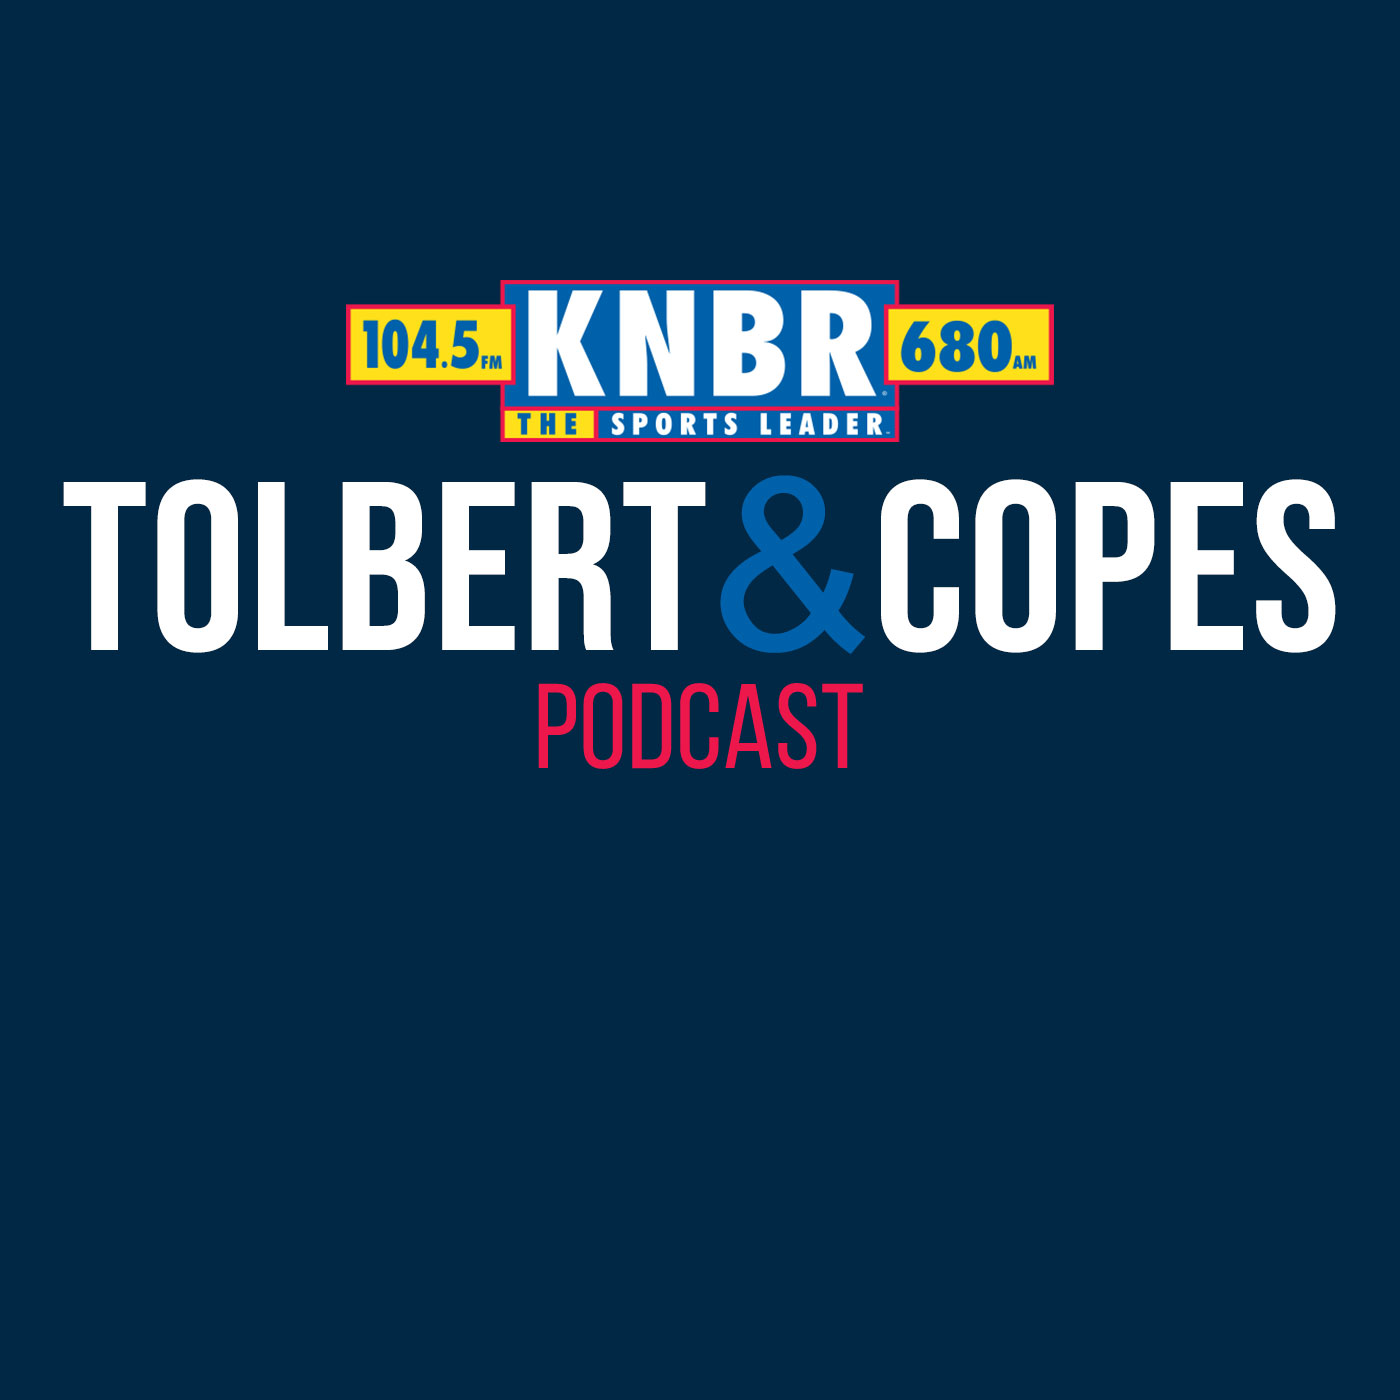 7-1 Tim Kawakami joins Tolbert & Copes to discuss Klay Thompson leaving the Warriors & why a Paul George trade didn't happen